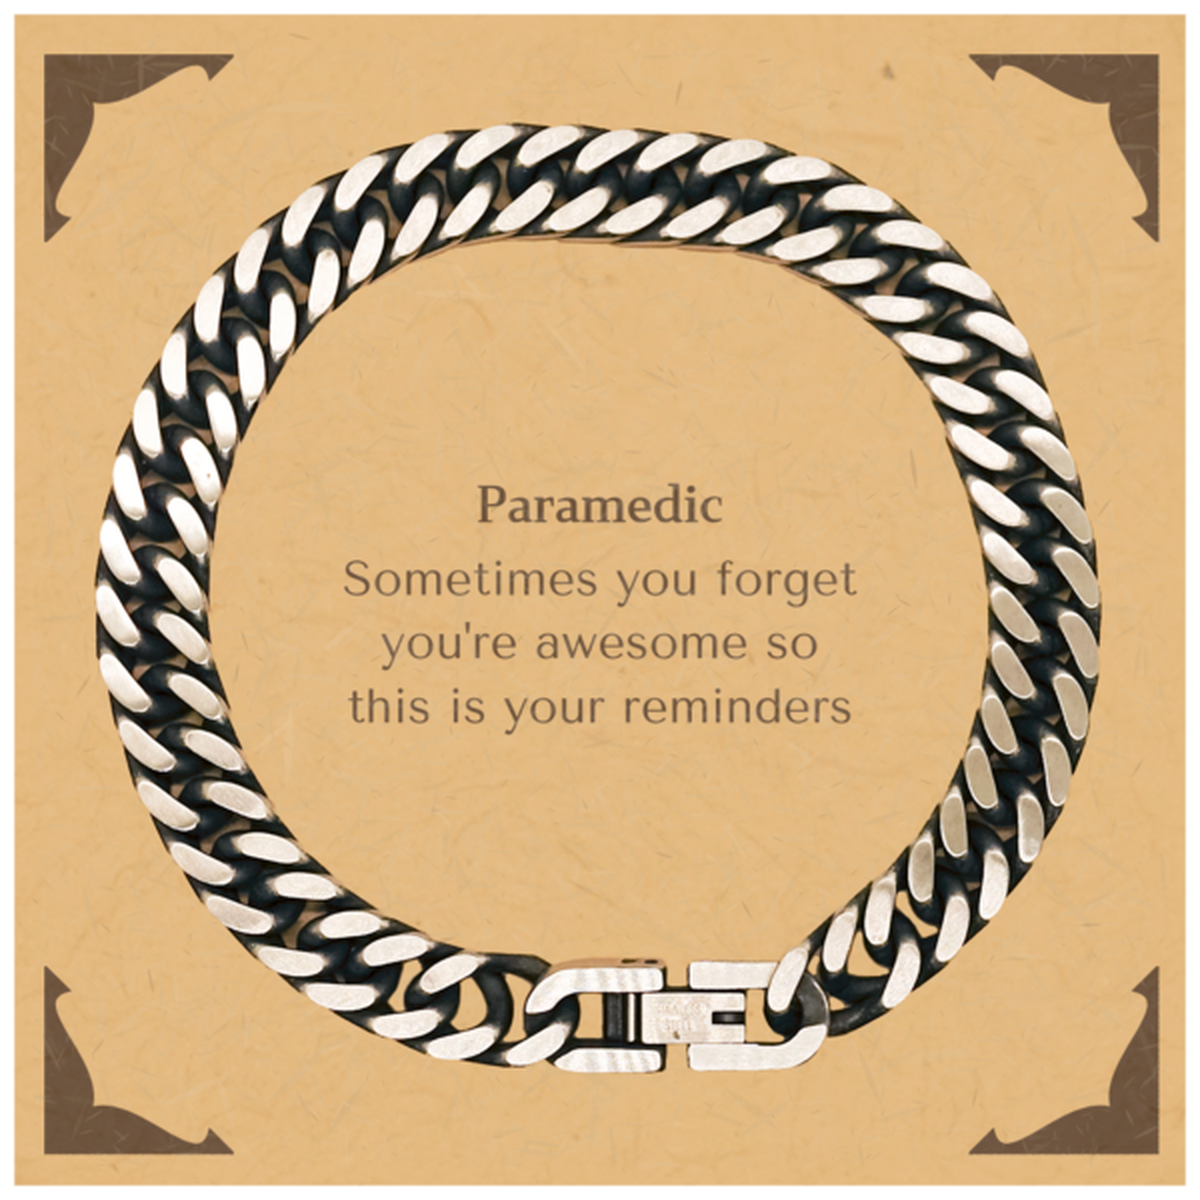 Sentimental Paramedic Cuban Link Chain Bracelet, Paramedic Sometimes you forget you're awesome so this is your reminders, Graduation Christmas Birthday Gifts for Paramedic, Men, Women, Coworkers